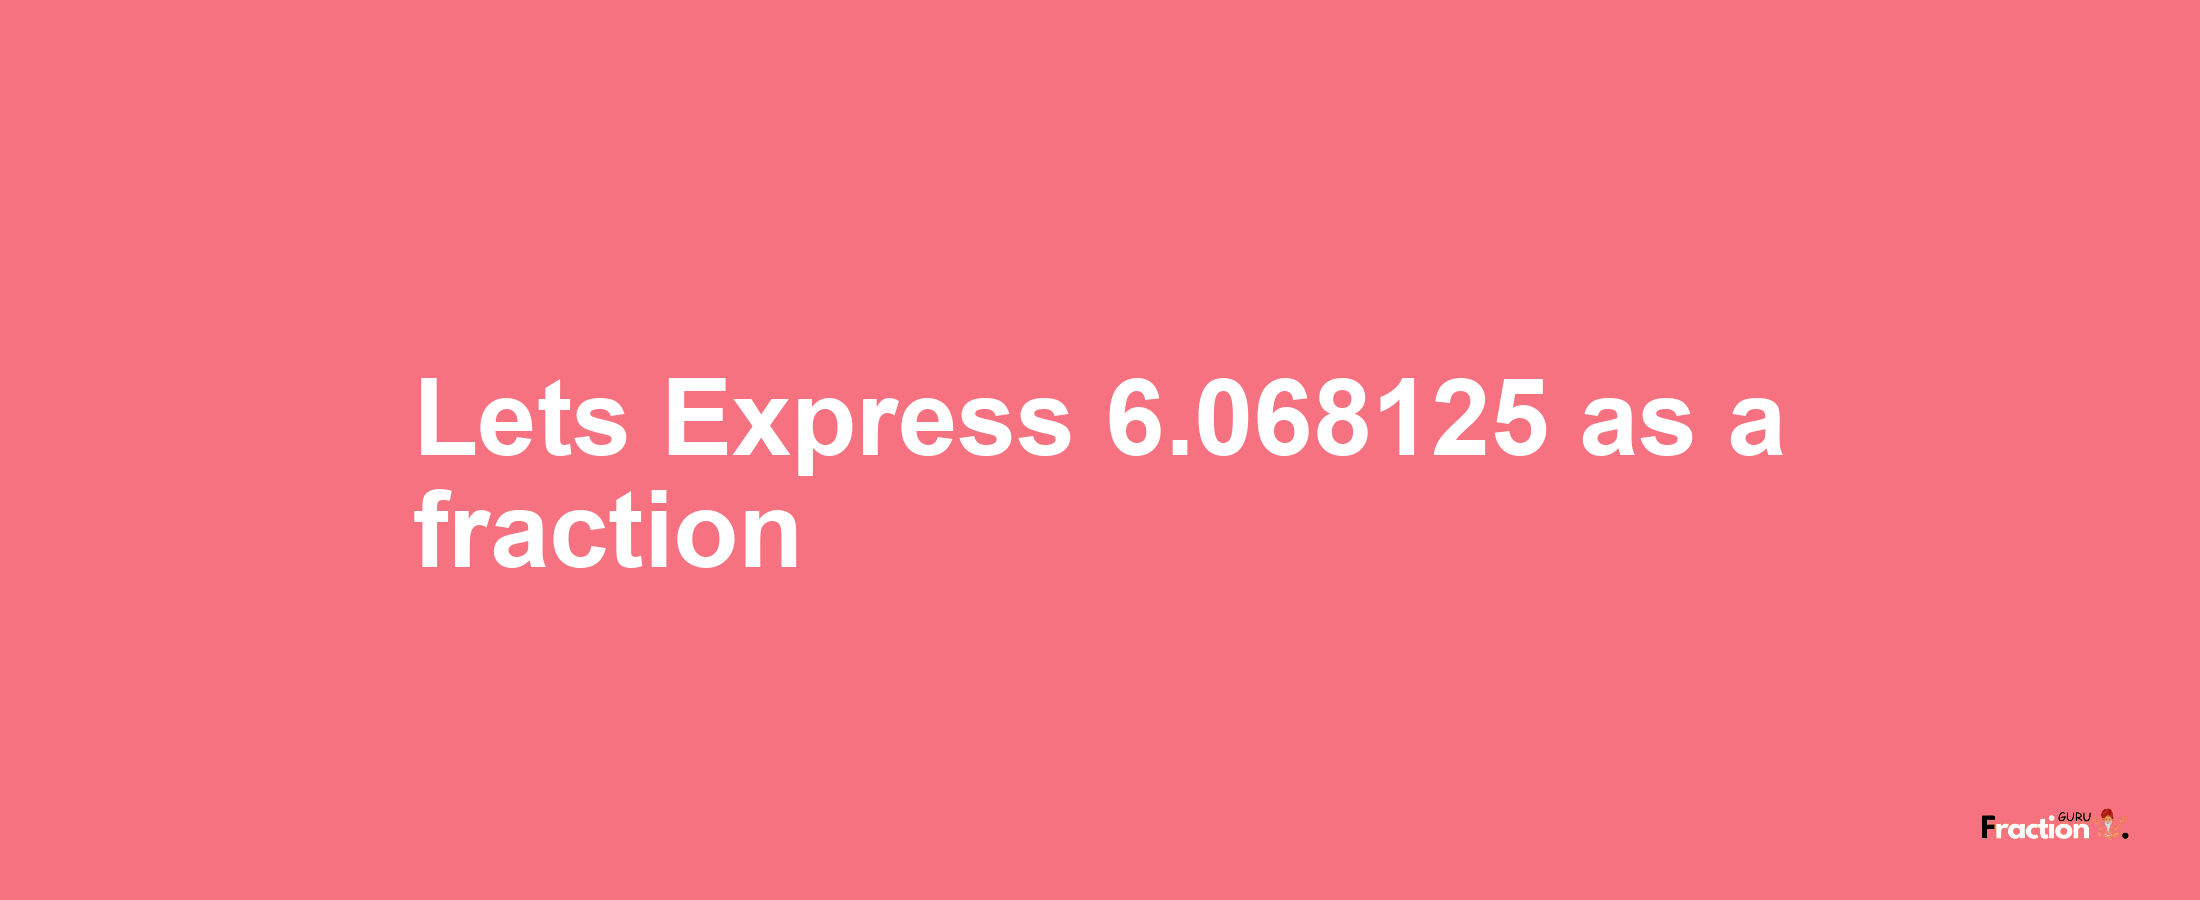 Lets Express 6.068125 as afraction